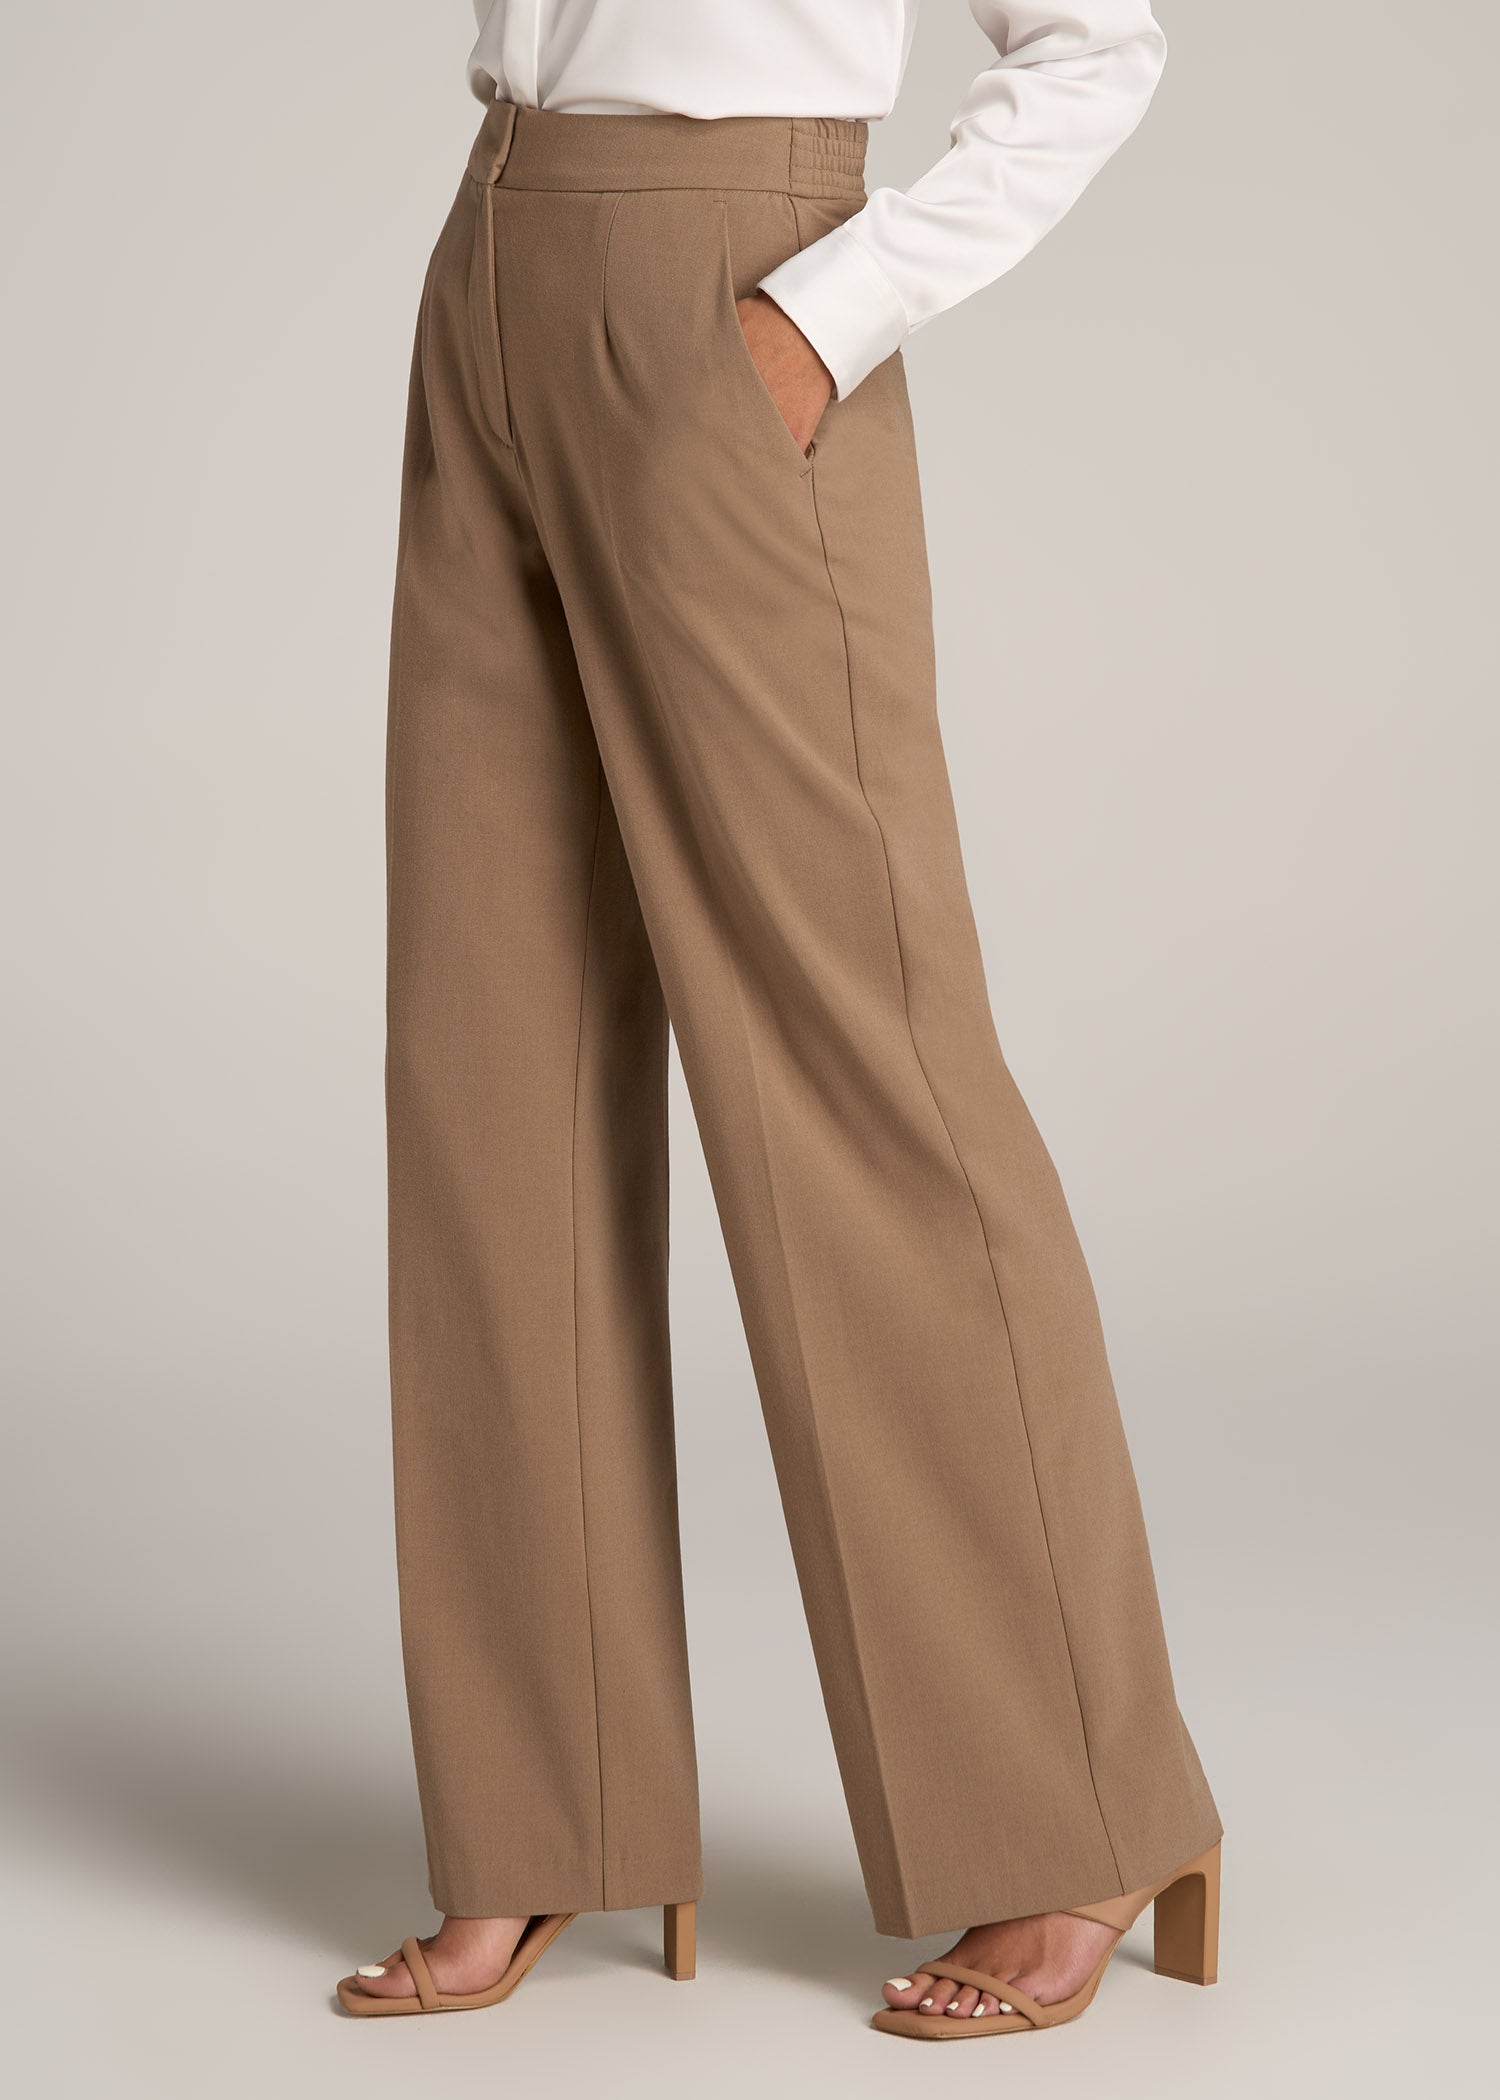 Ladies Viscose Trousers | Viscose Trousers for Women | hush